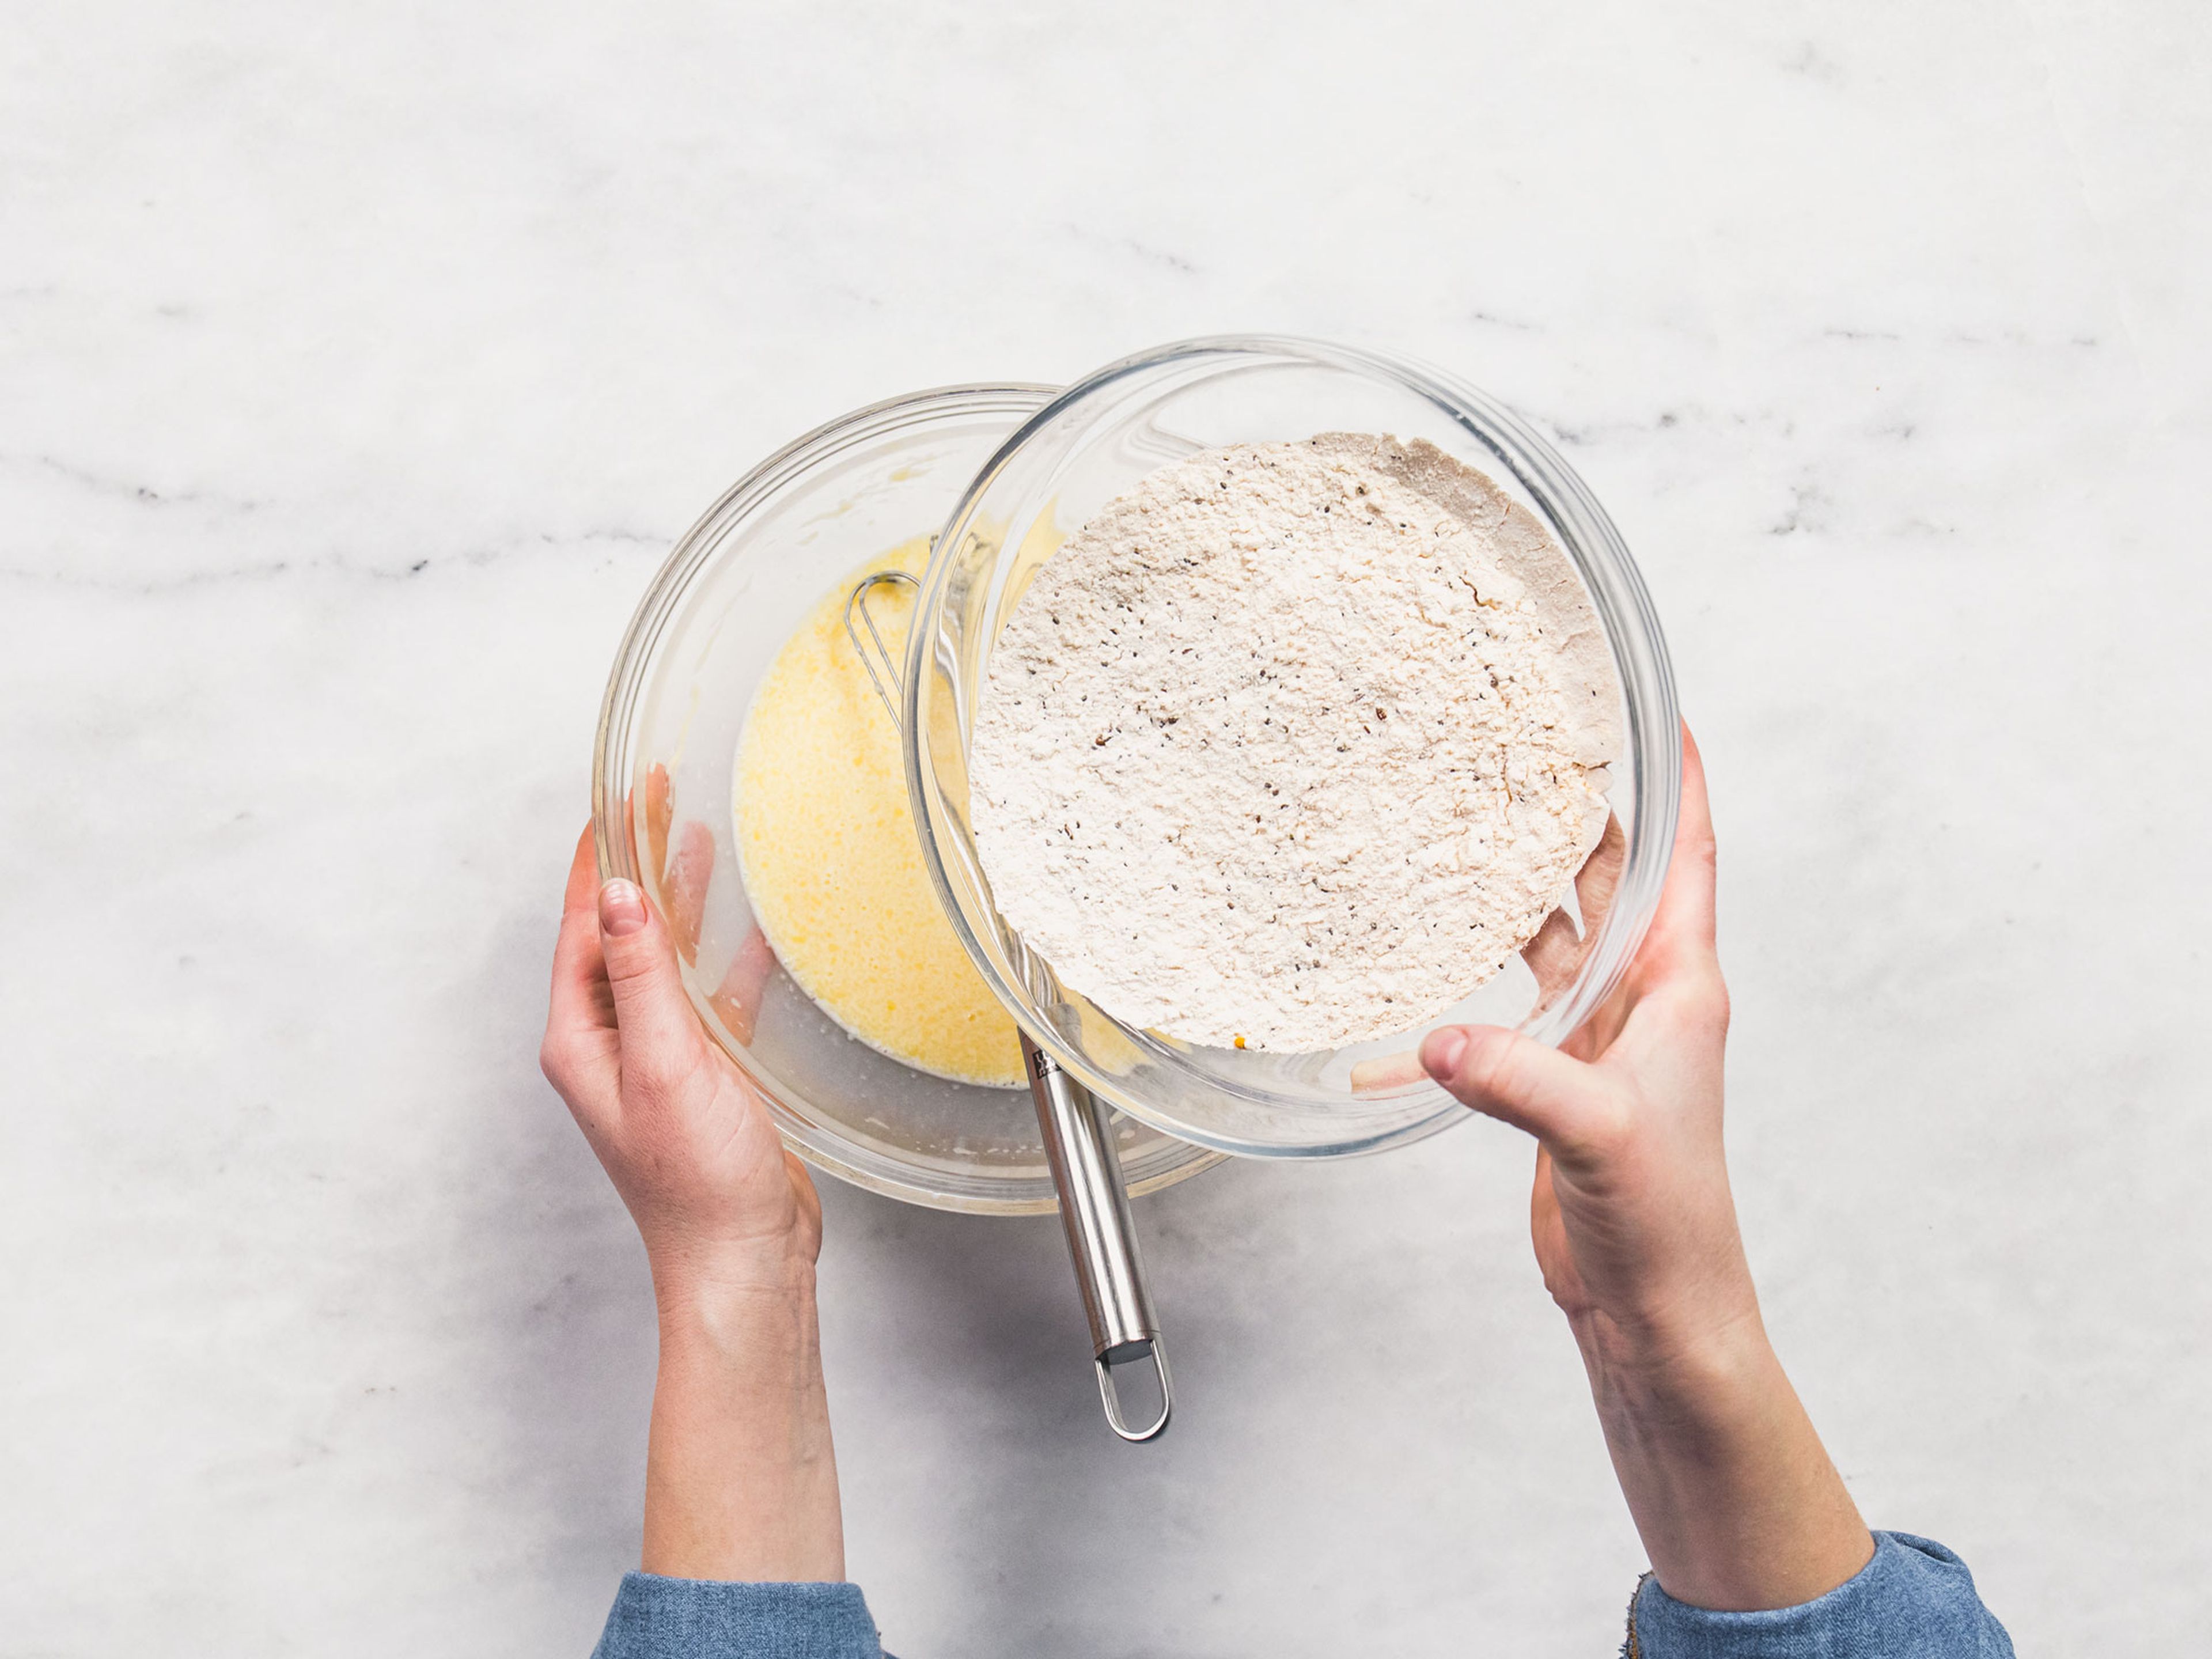 Whisk together flaxseeds, chia seeds, flour, baking powder, sugar, turmeric, and salt in a bowl. In a separate bowl, whisk together egg, milk, and melted butter. Add dry ingredients to wet ingredients and whisk to combine.